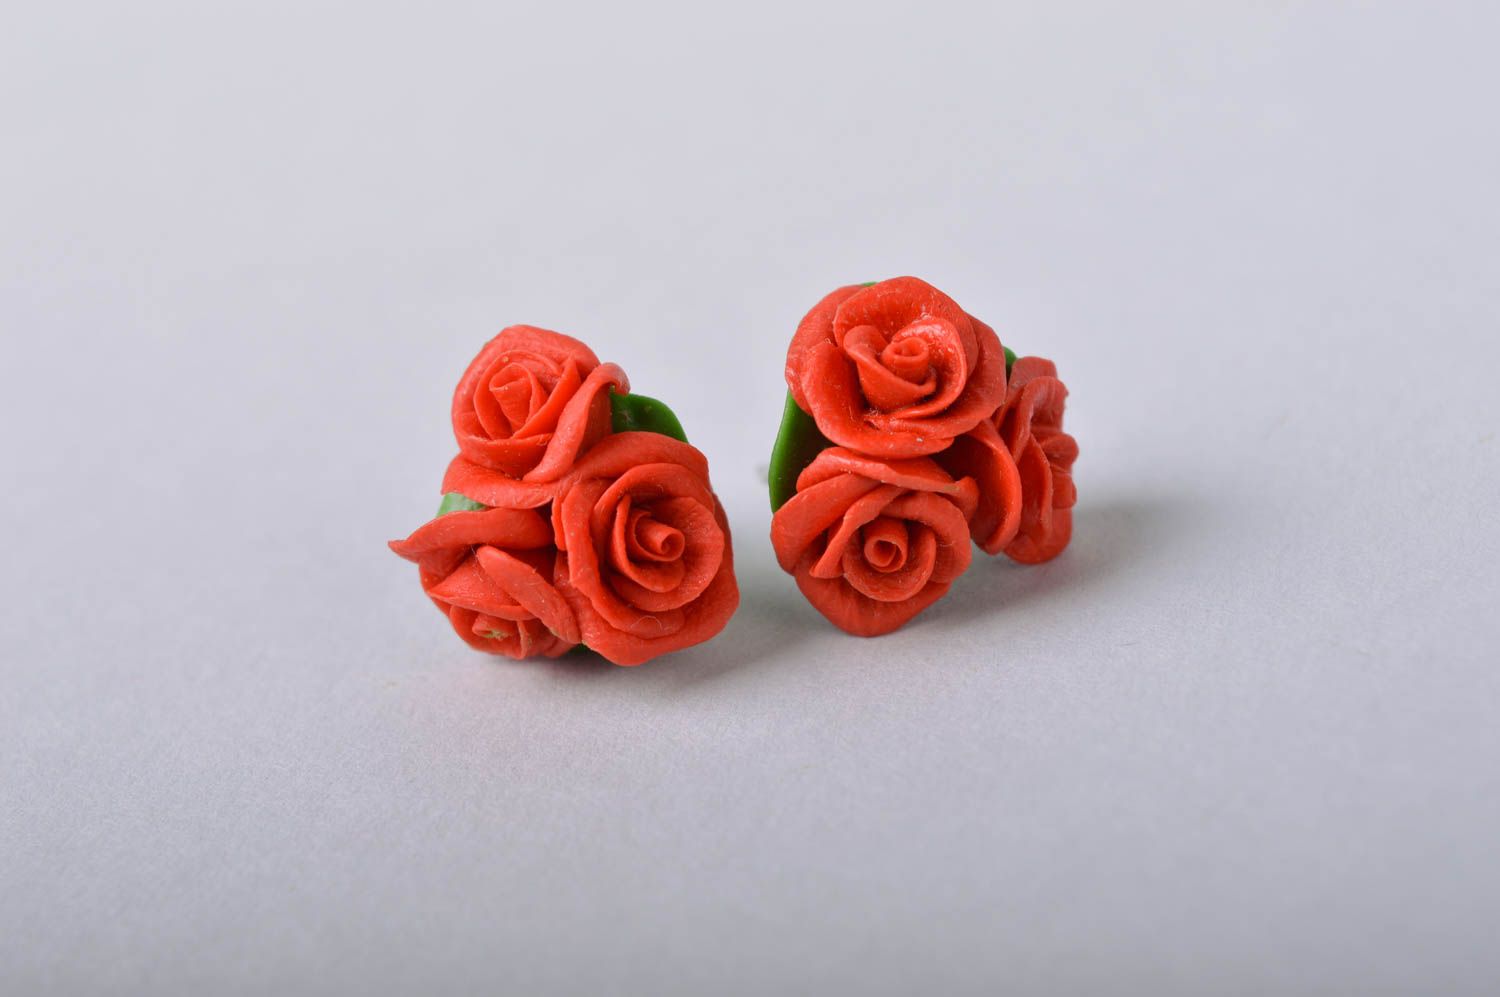 Handmade flower stud earrings made of cold porcelain in shape of red roses photo 4